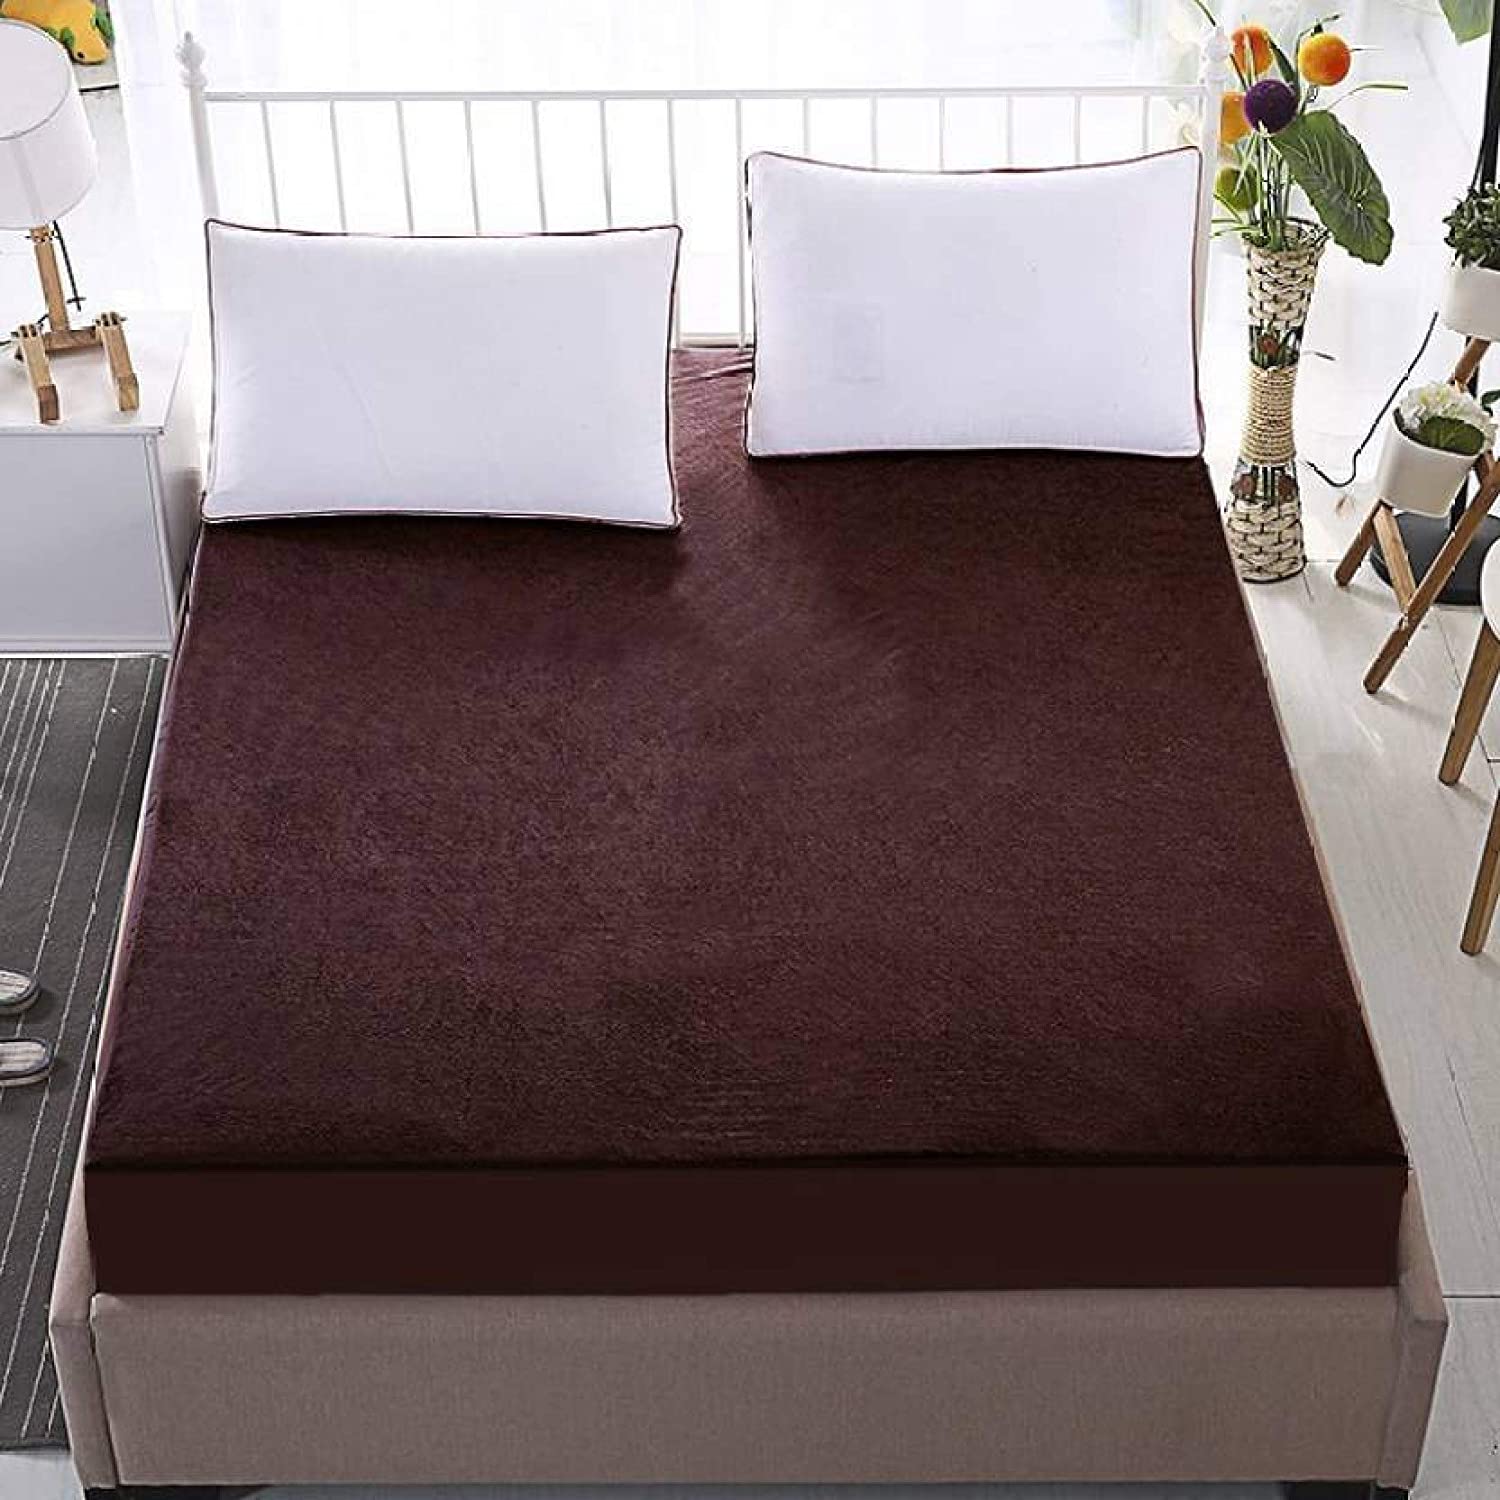 100% Waterproof Terry Cotton Fitted Mattress Protector for King Size Bed (78 x 72 Inch, Brown)